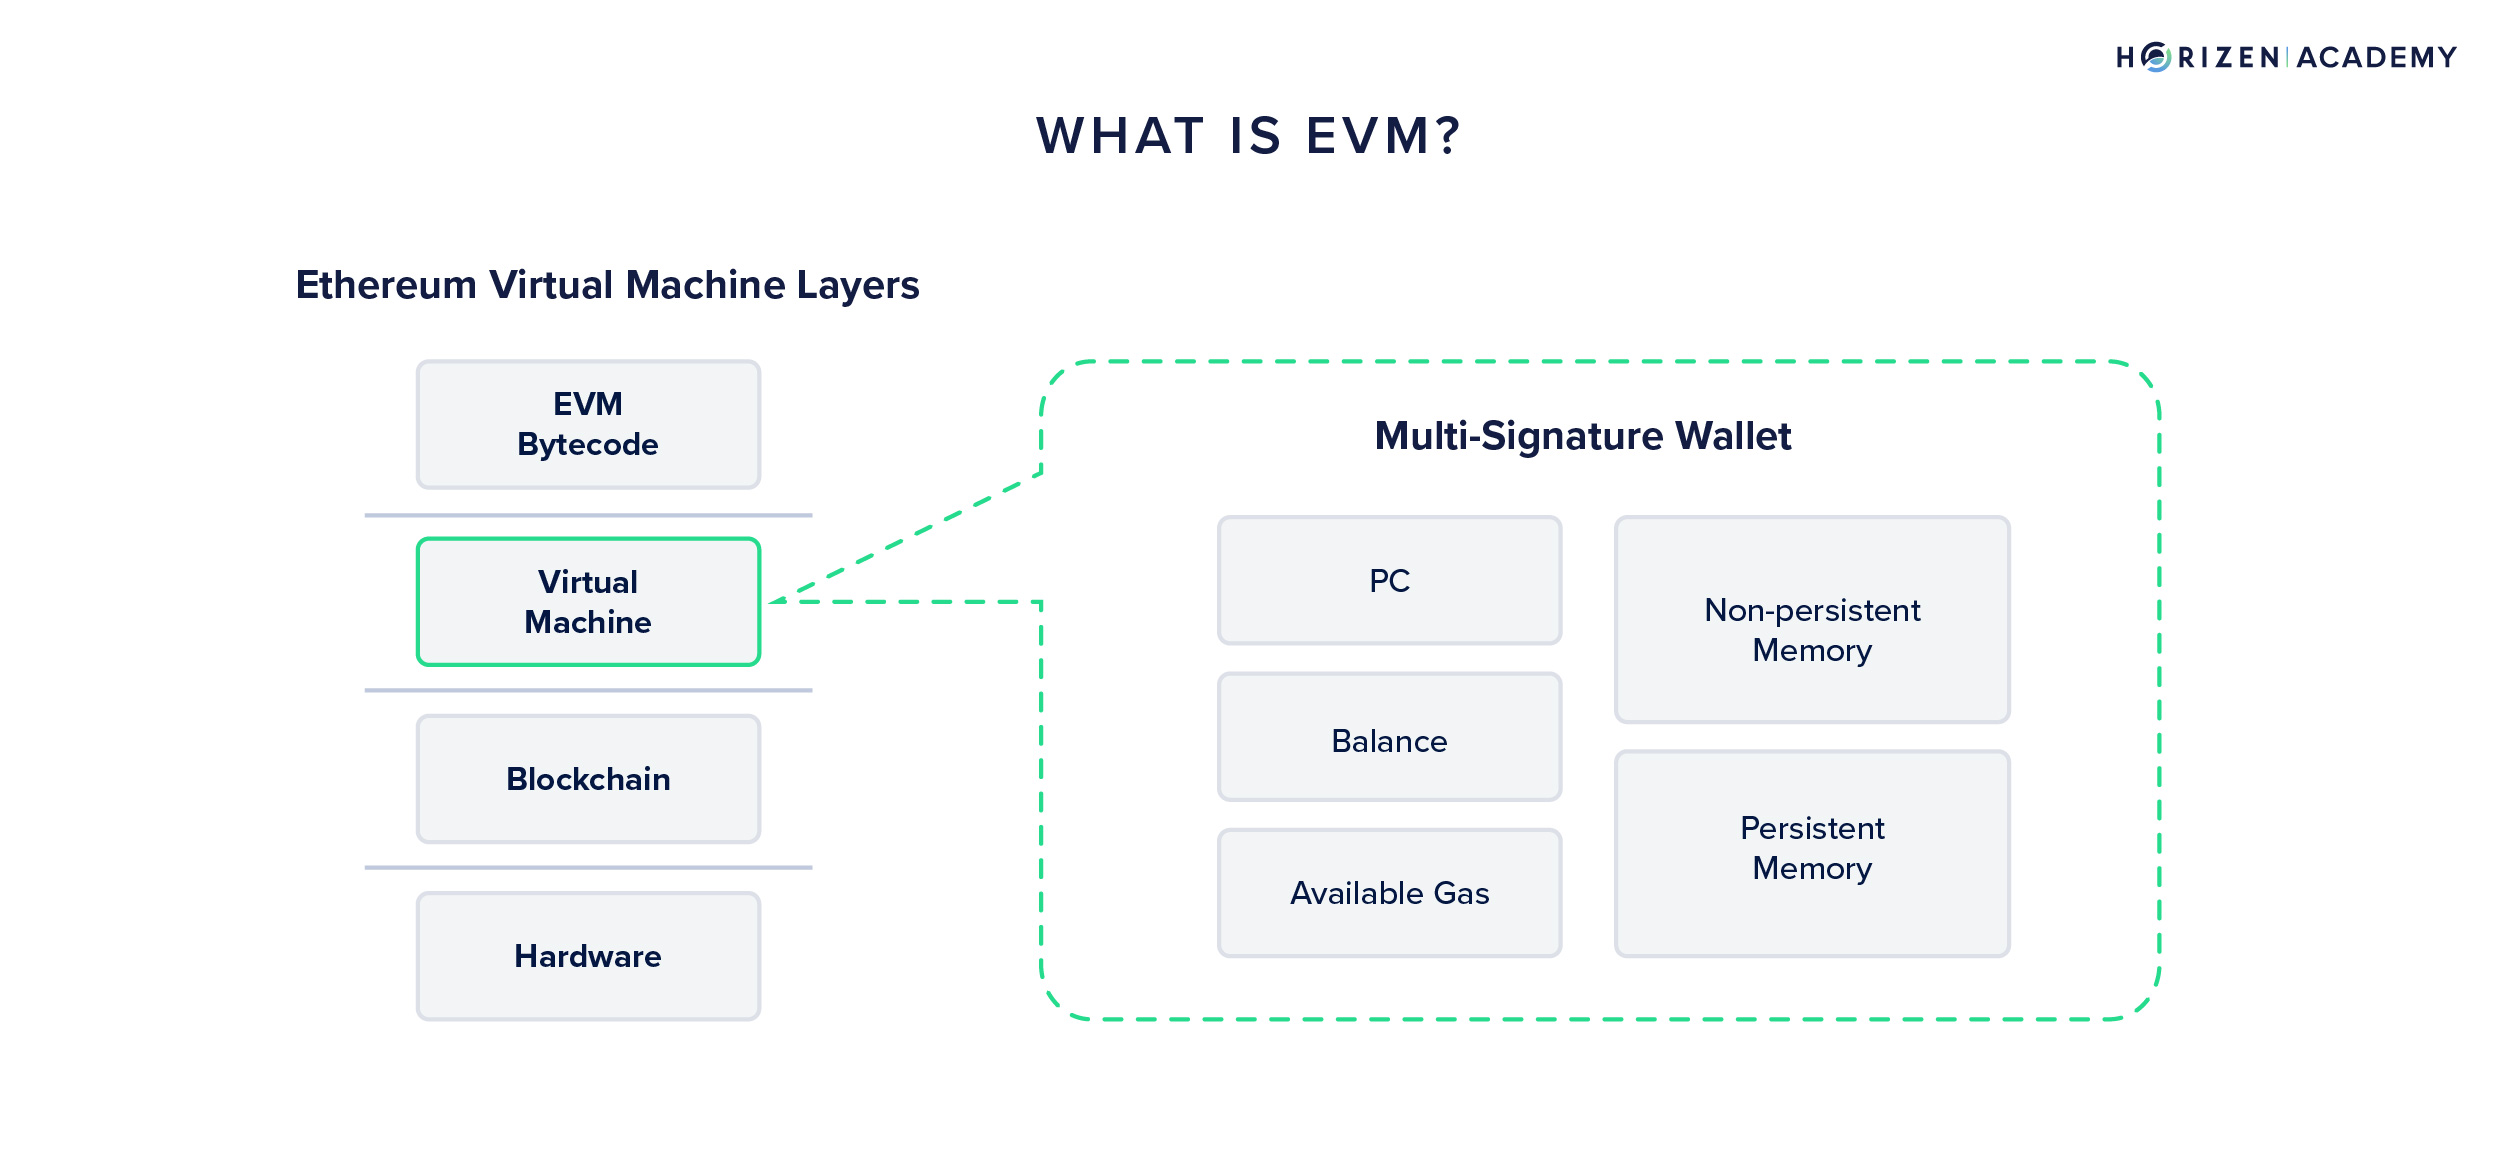 What is EVM?